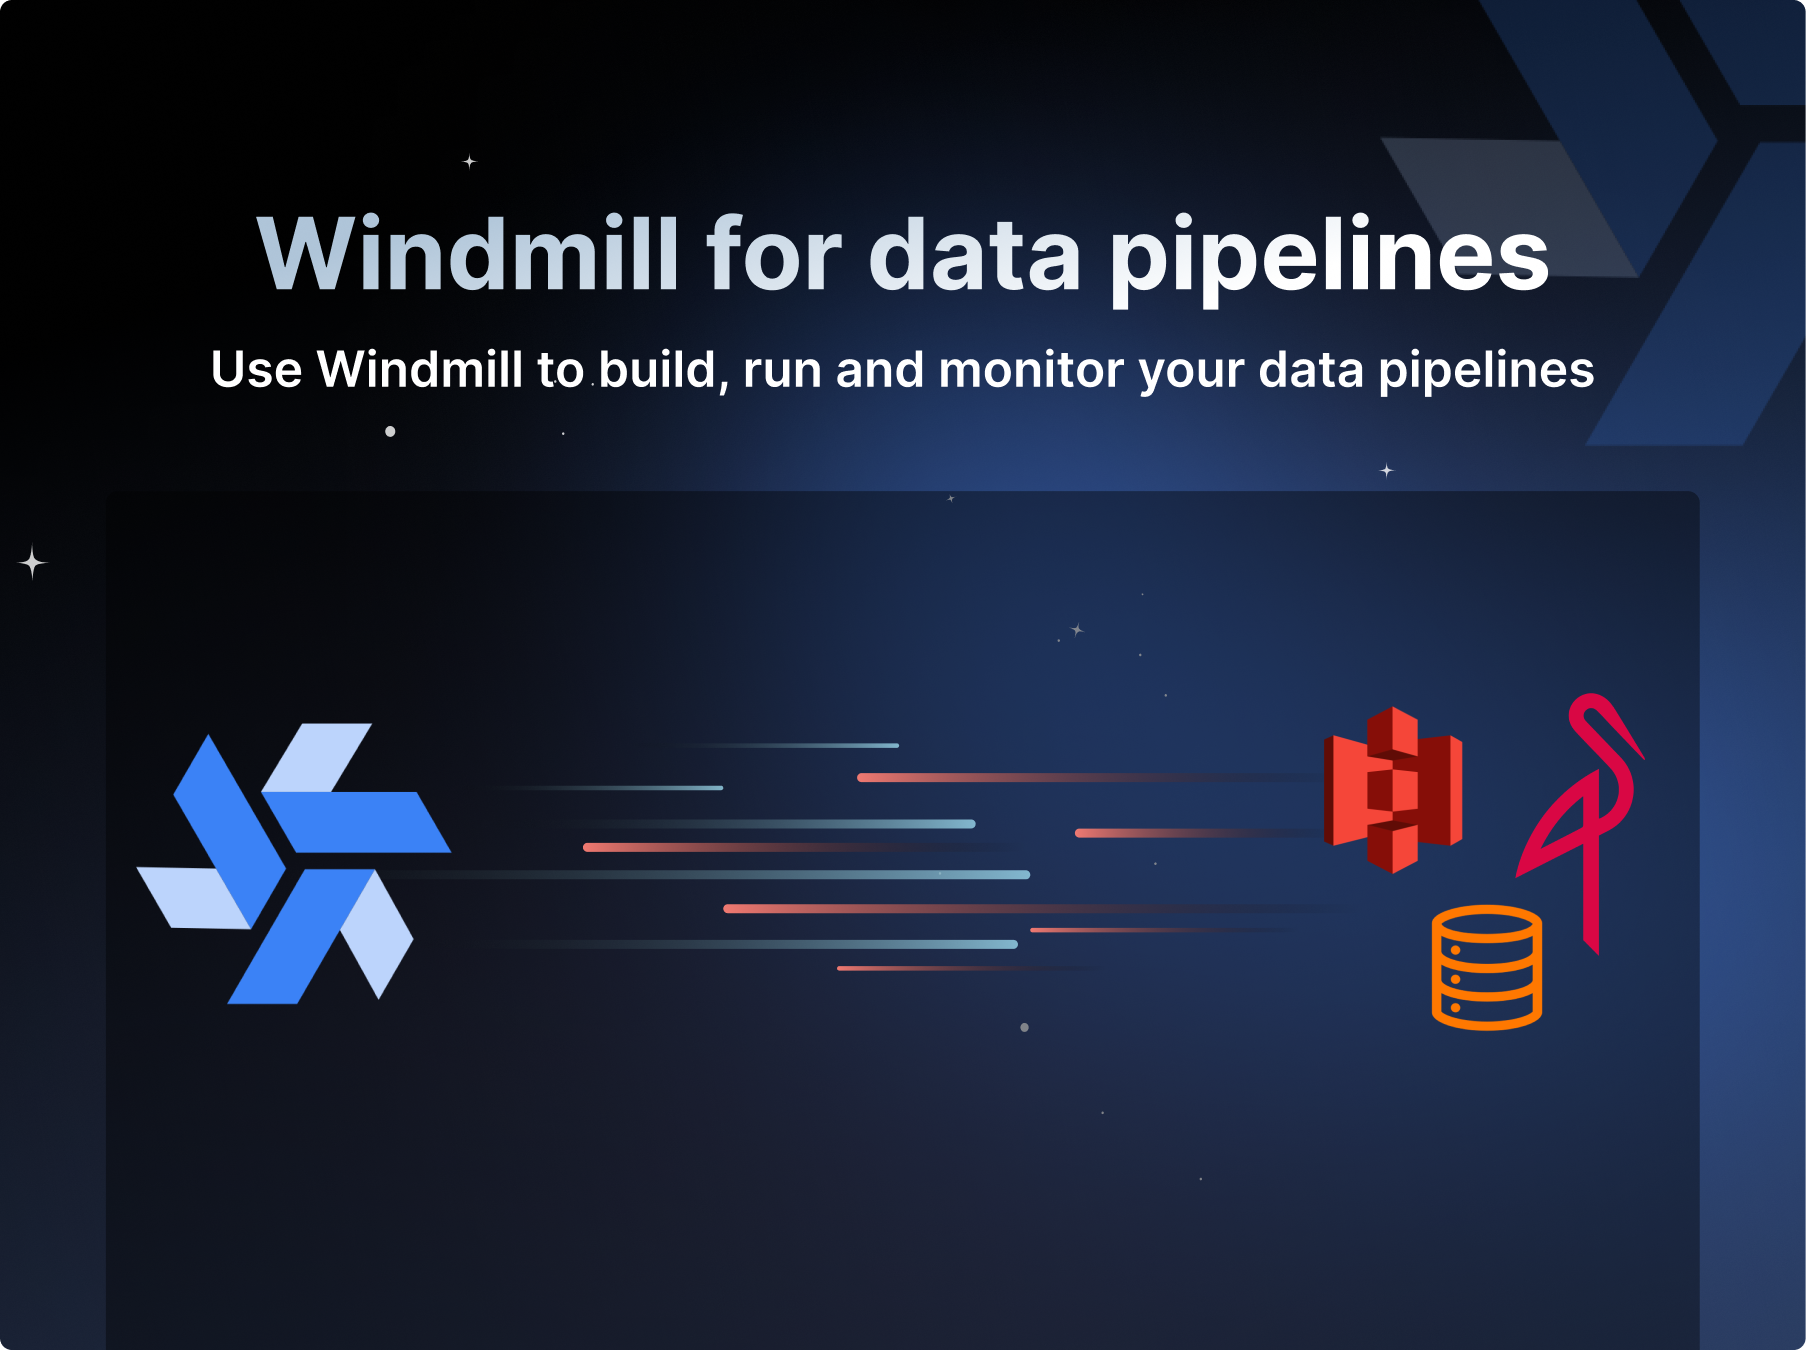 Windmill for data pipelines